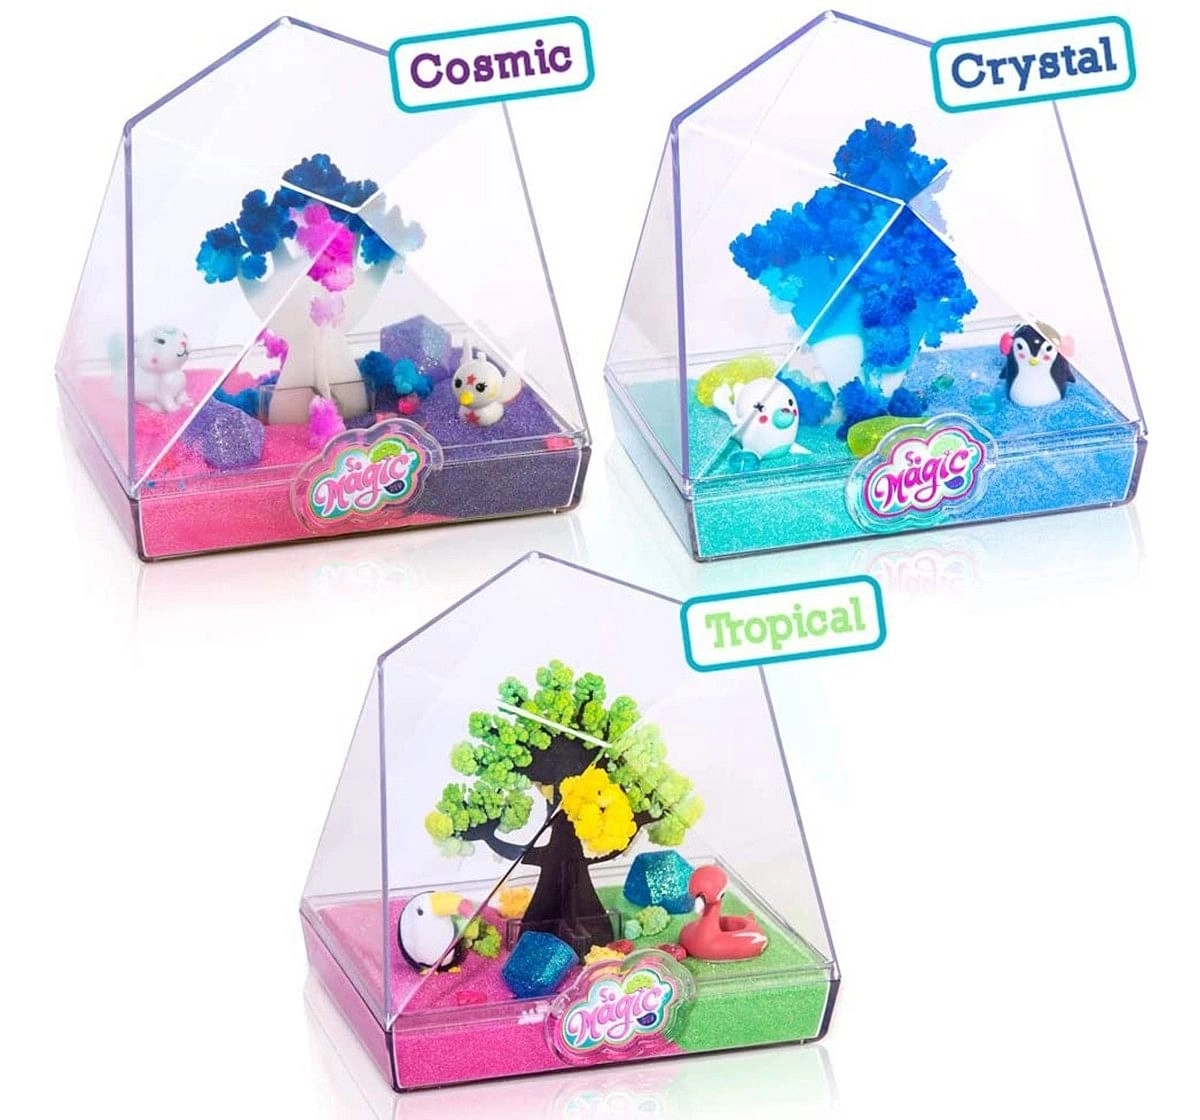 Canal Toys So Magic DIY Medium Glitterarium Kit with 3 Assorted Colors for Kids age 6Y+ 